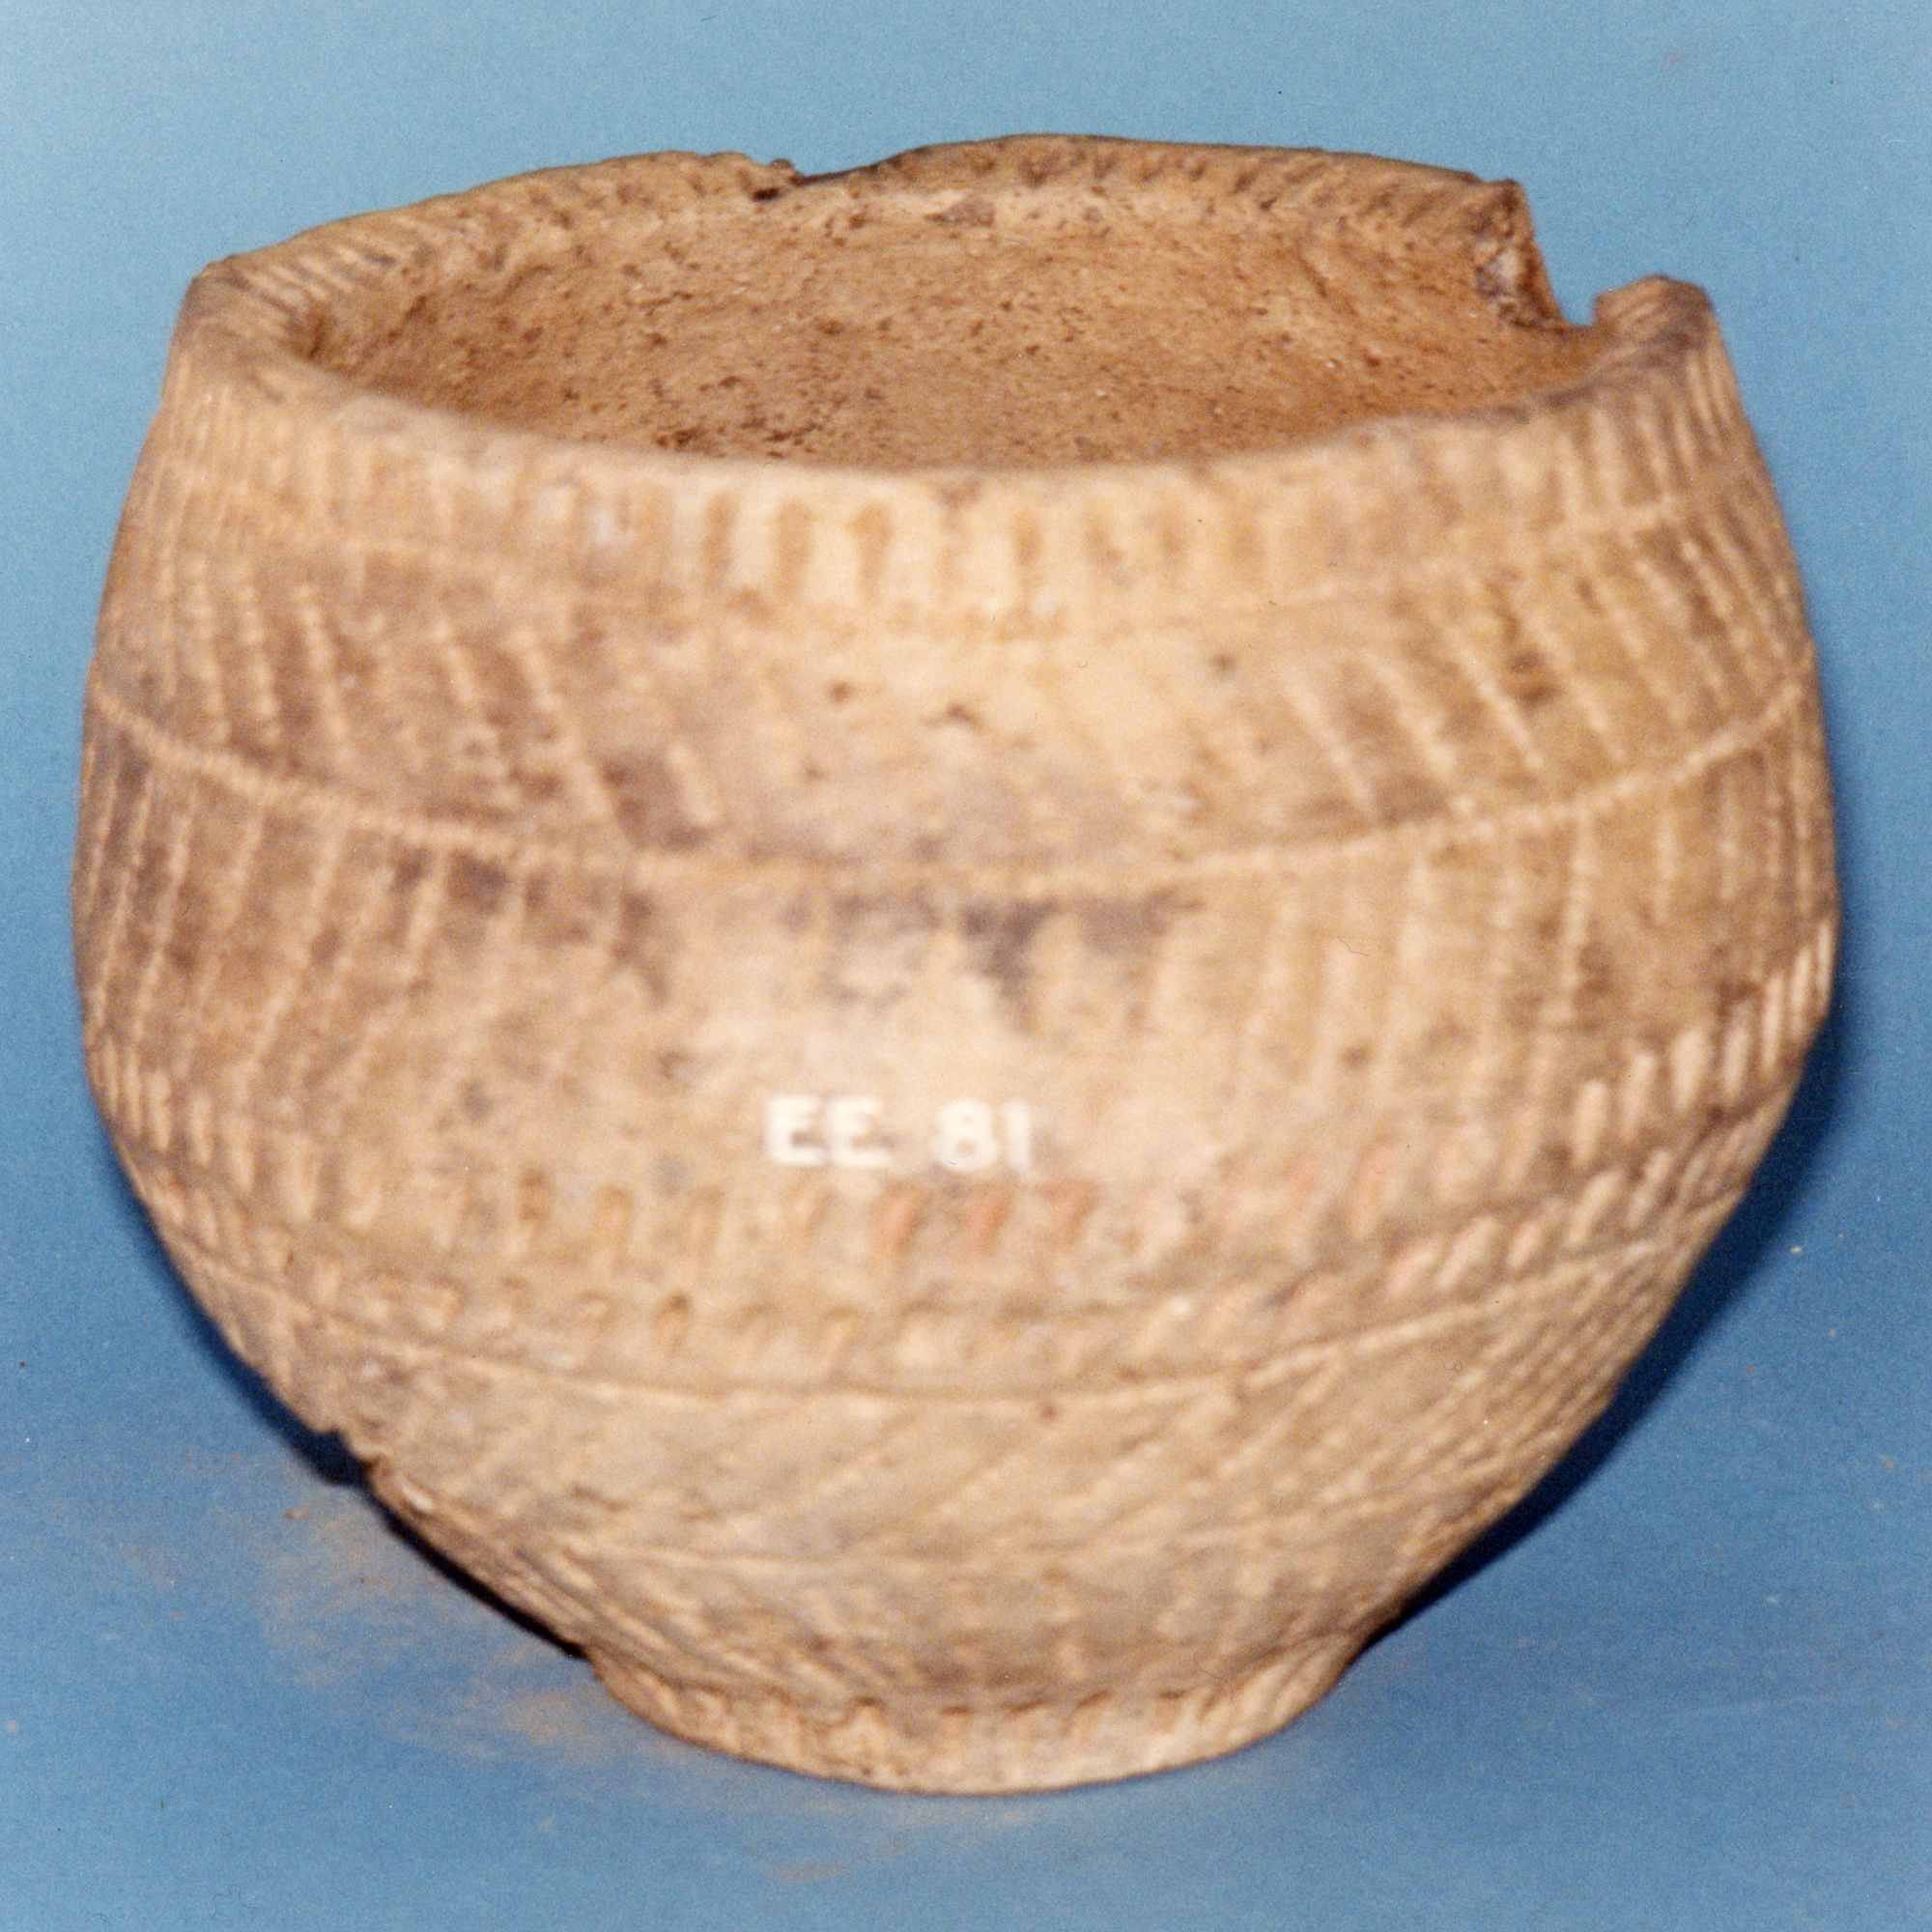 Image of Pottery food vessel from Duncra Hill, Pencaitland © National Museums Scotland